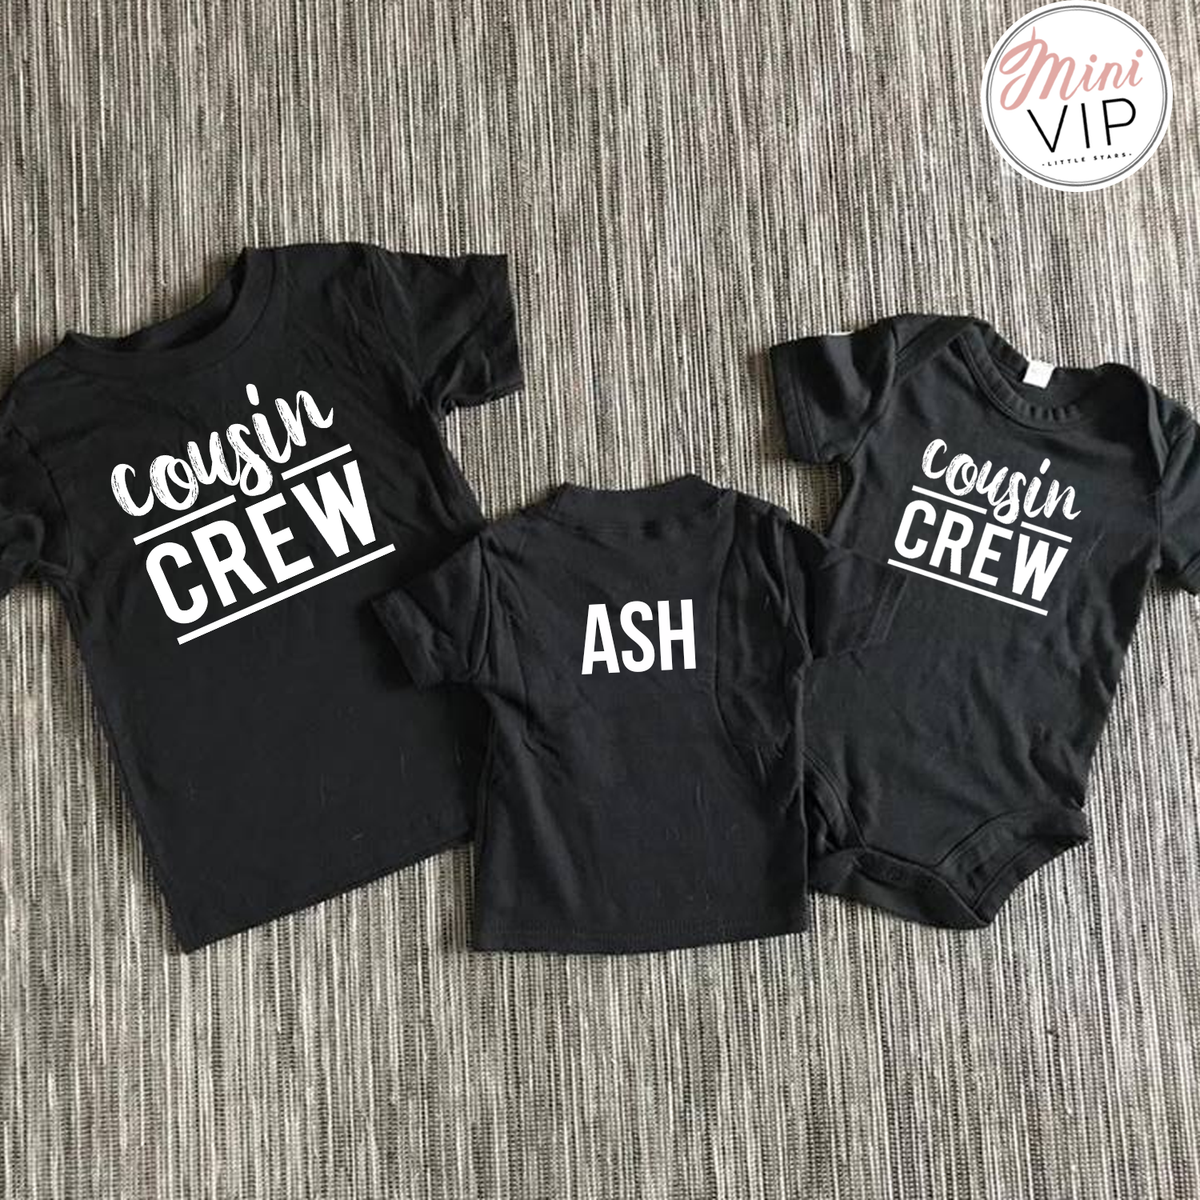 COUSIN CREW personalised black t-shirts!